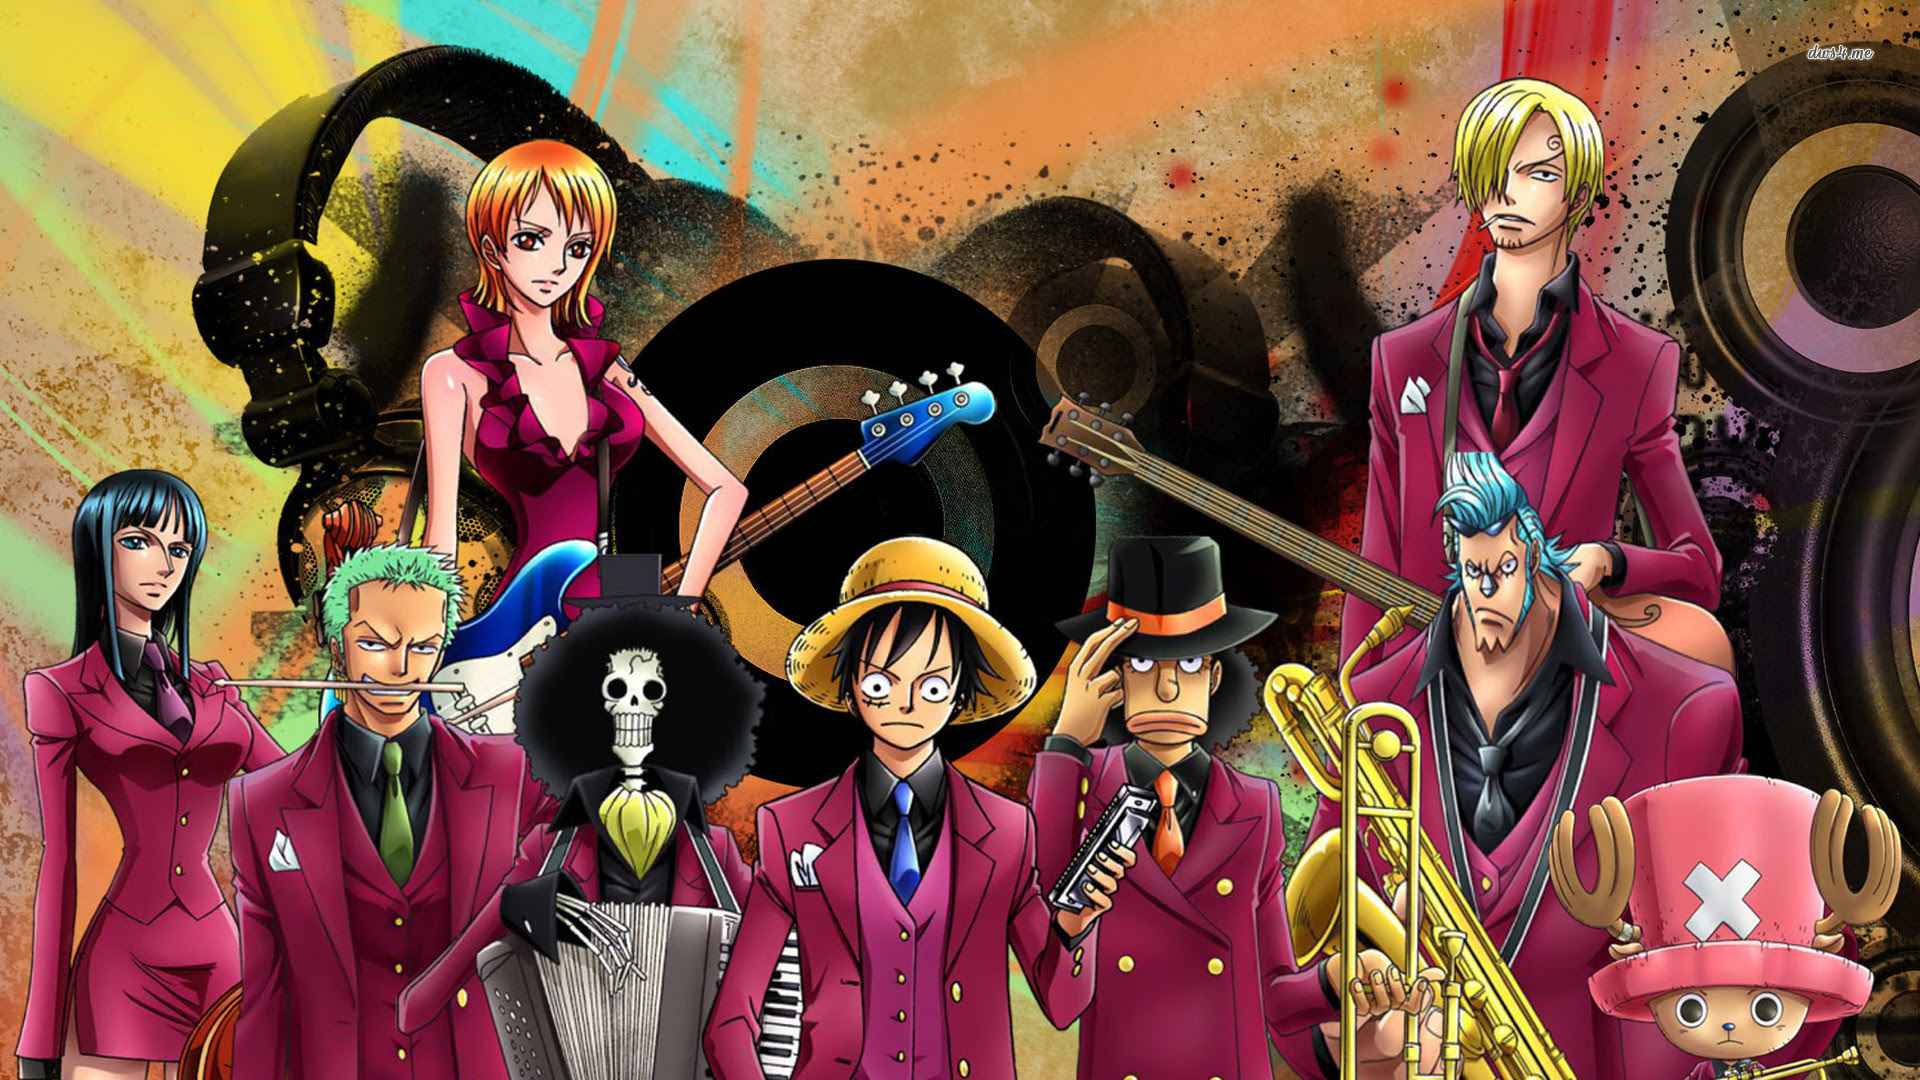 High Resolution One Piece Wano Wallpaper 4k - Wallpaper Images Android PC HD